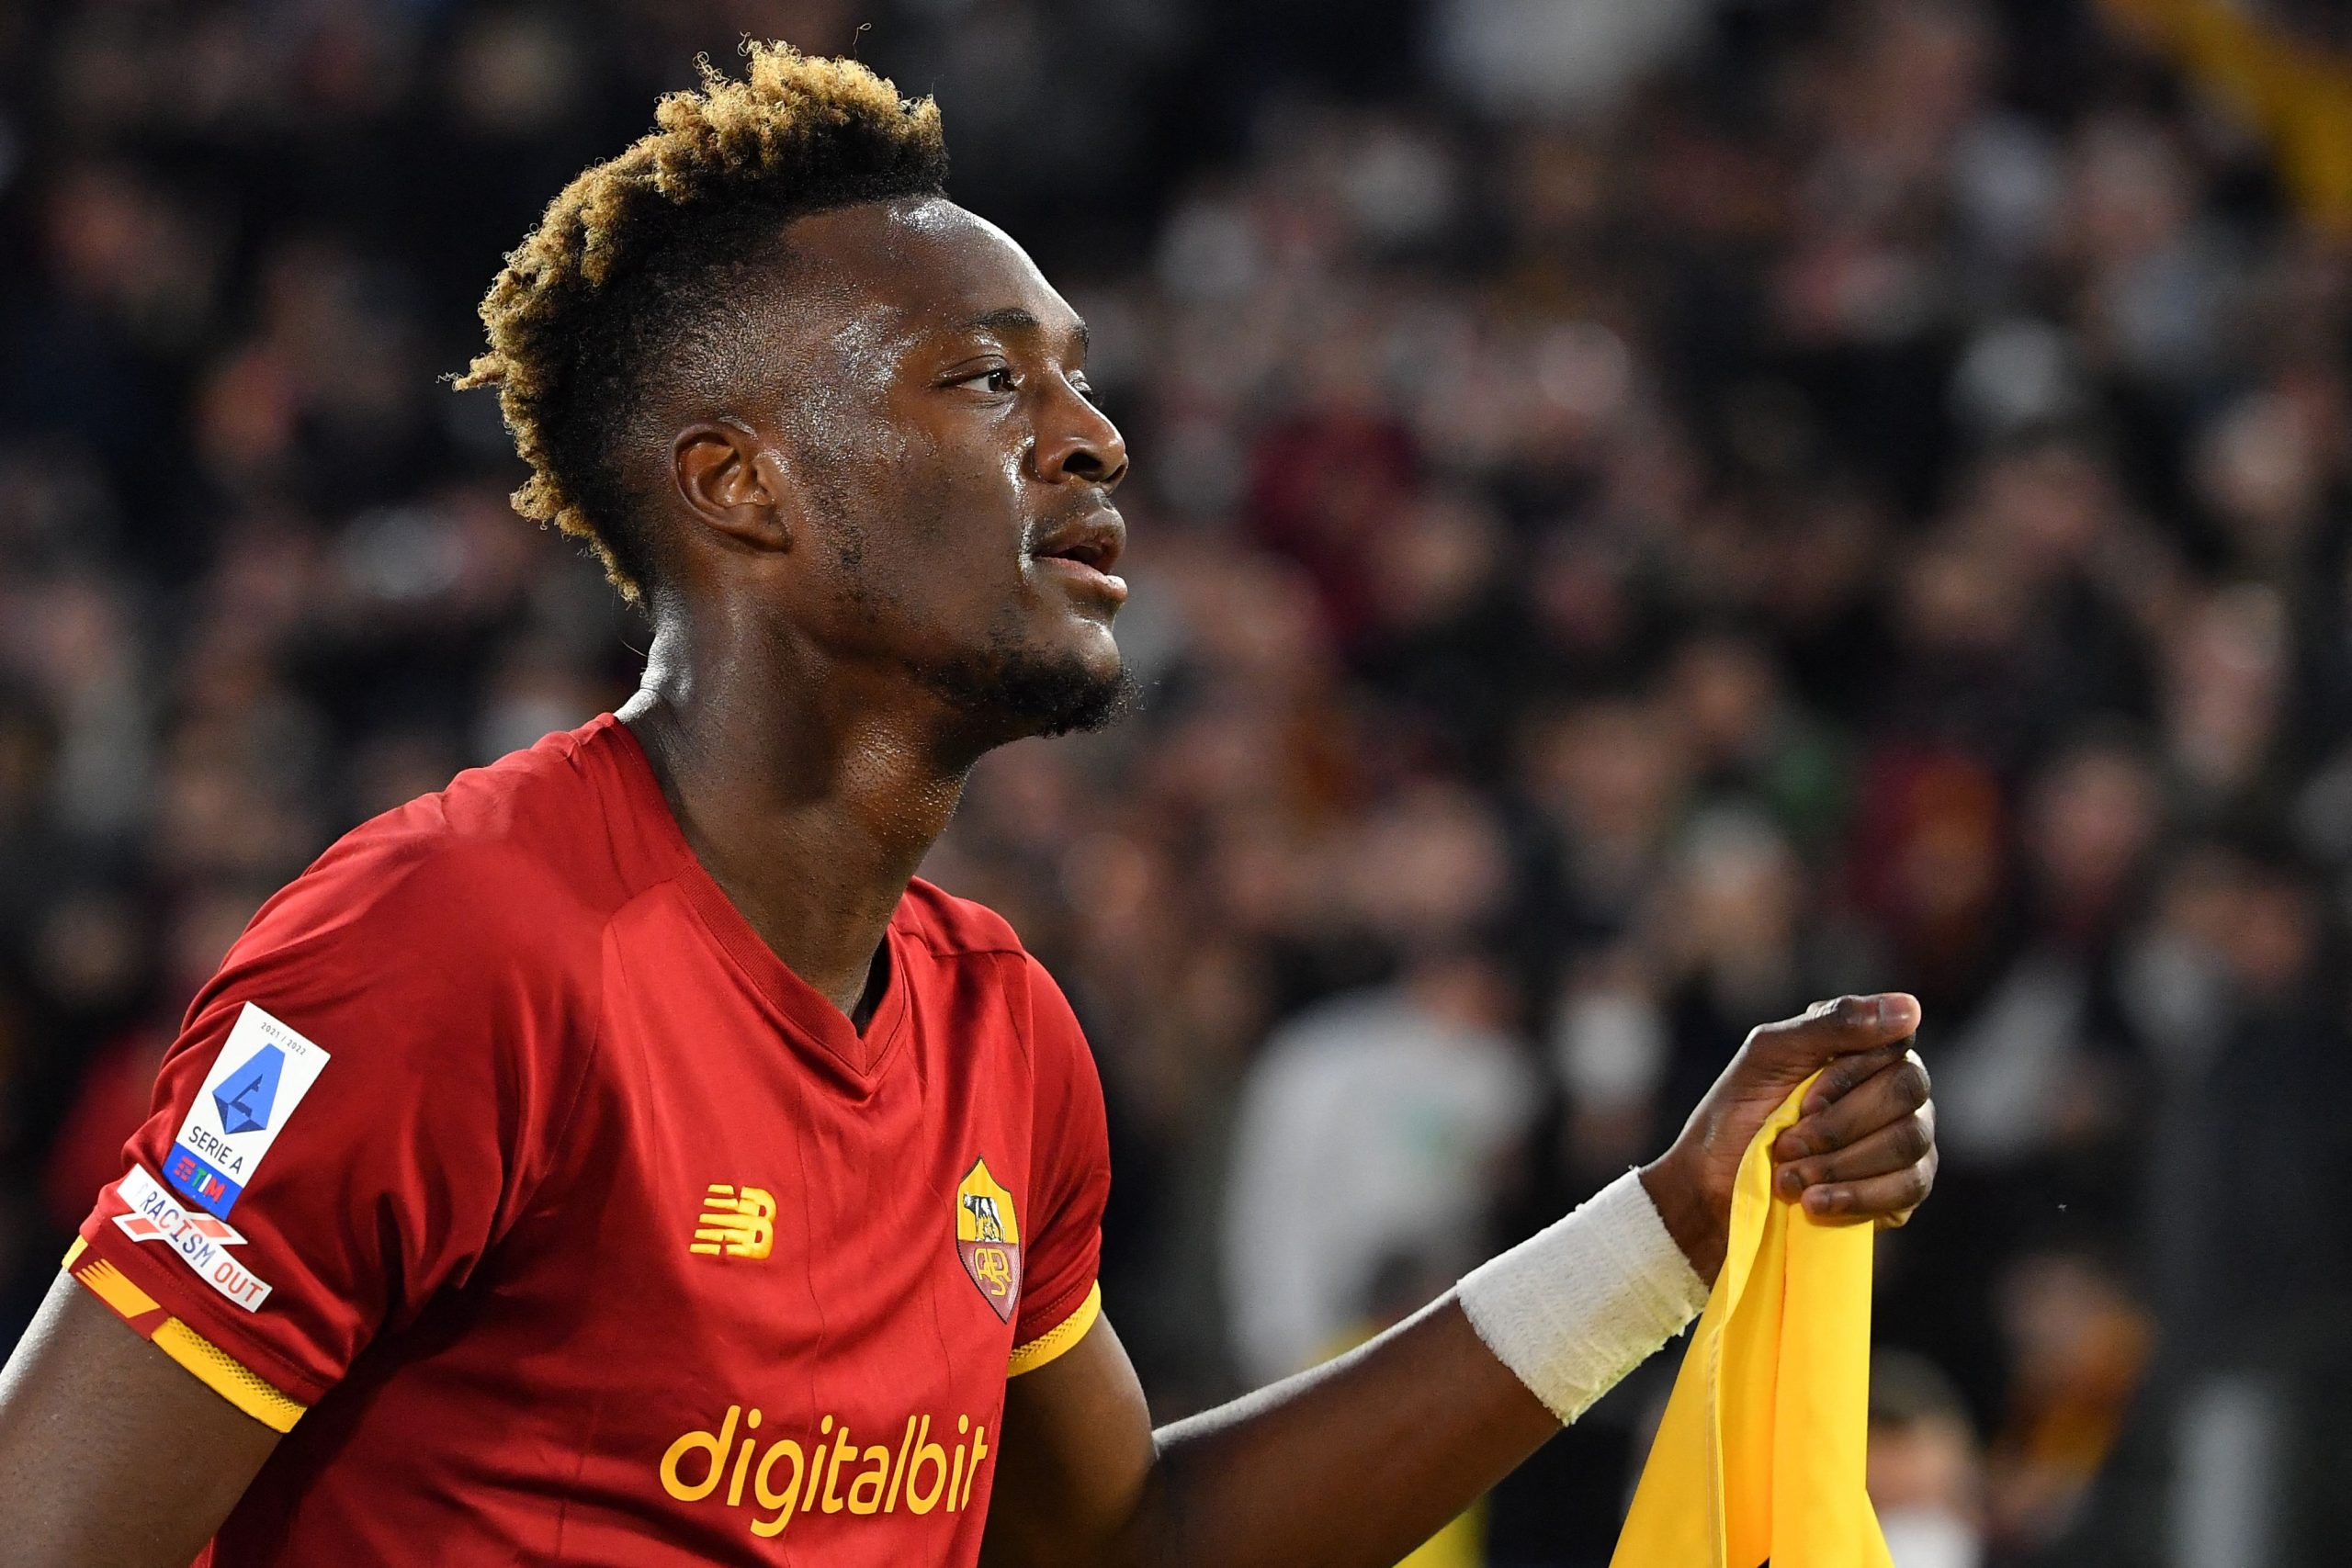 Tammy Abraham joined AS Roma last summer. (Photo by TIZIANA FABI/AFP via Getty Images)